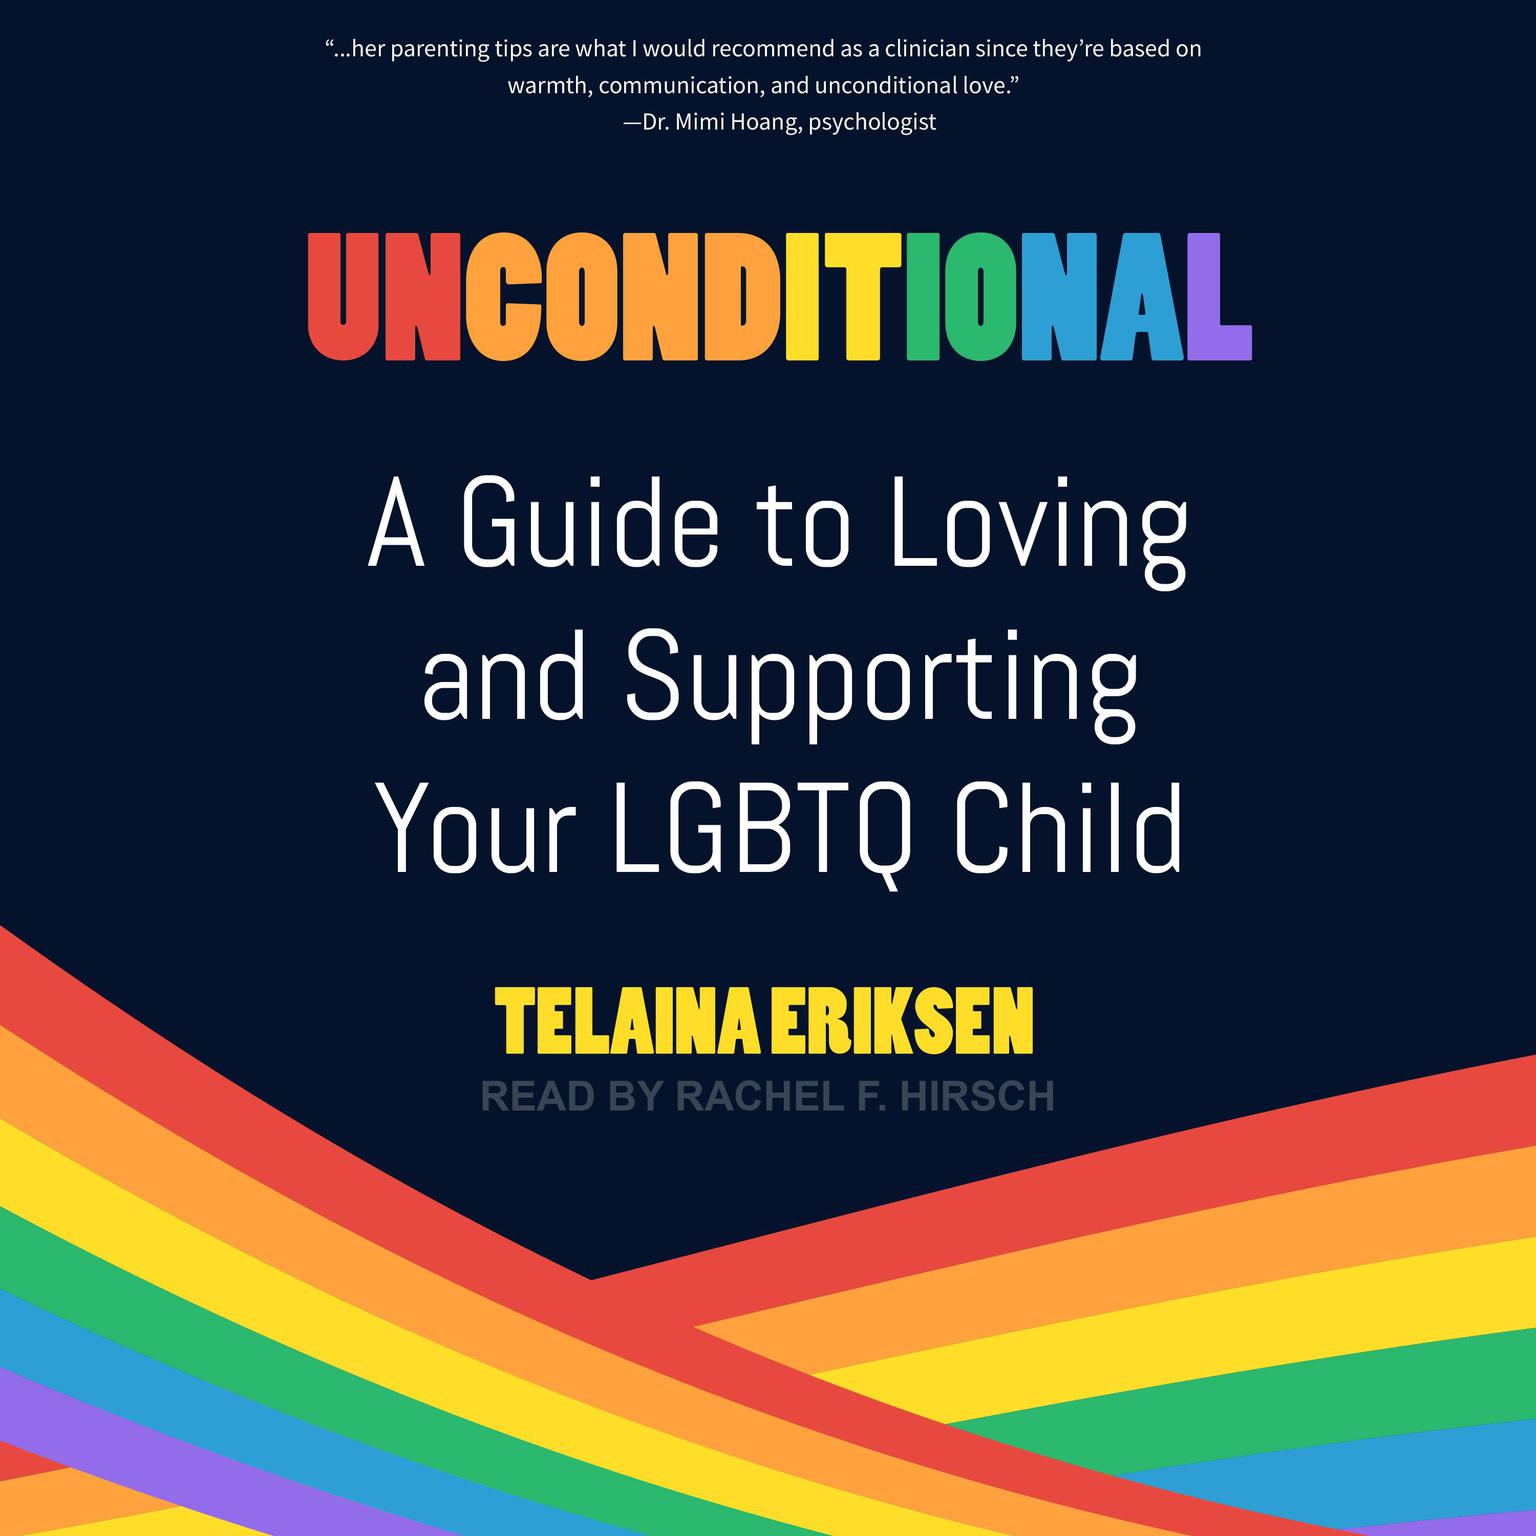 Unconditional: A Guide to Loving and Supporting Your LGBTQ Child Audiobook, by Telaina Eriksen